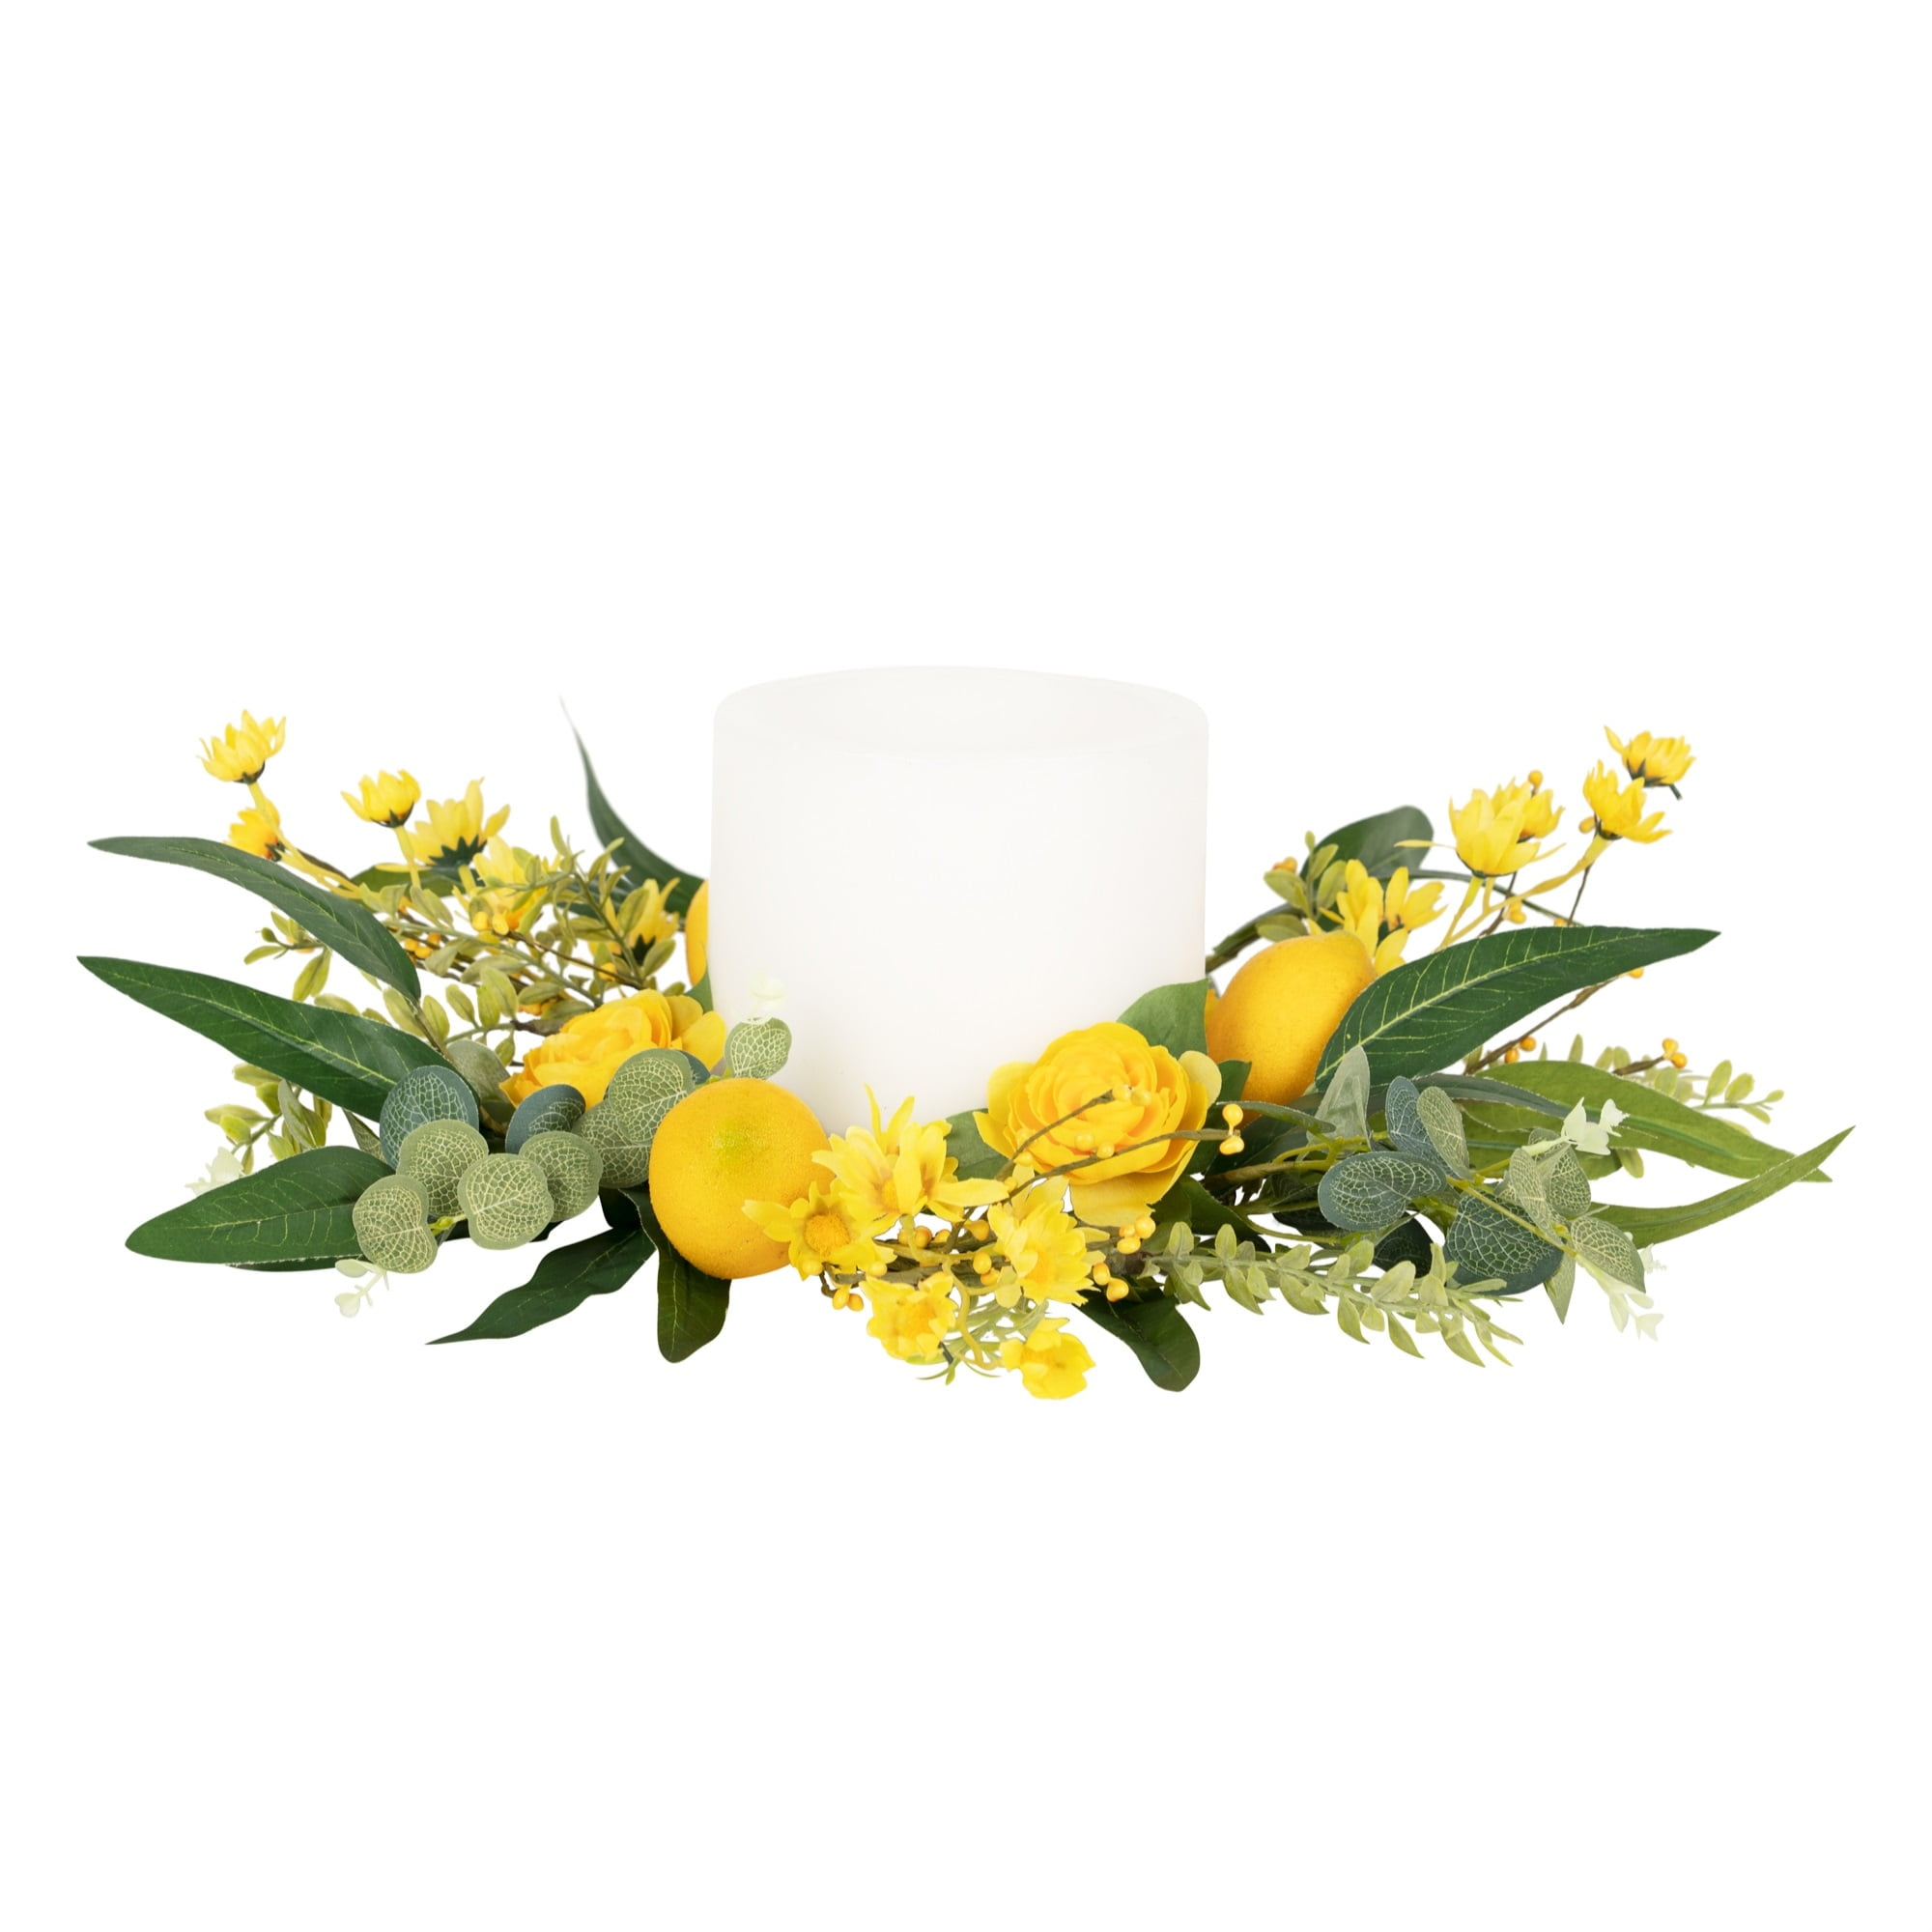 Lemon and Berry Candle Ring 19.5"D Fabric/Foam (Fits a 6" Candle)